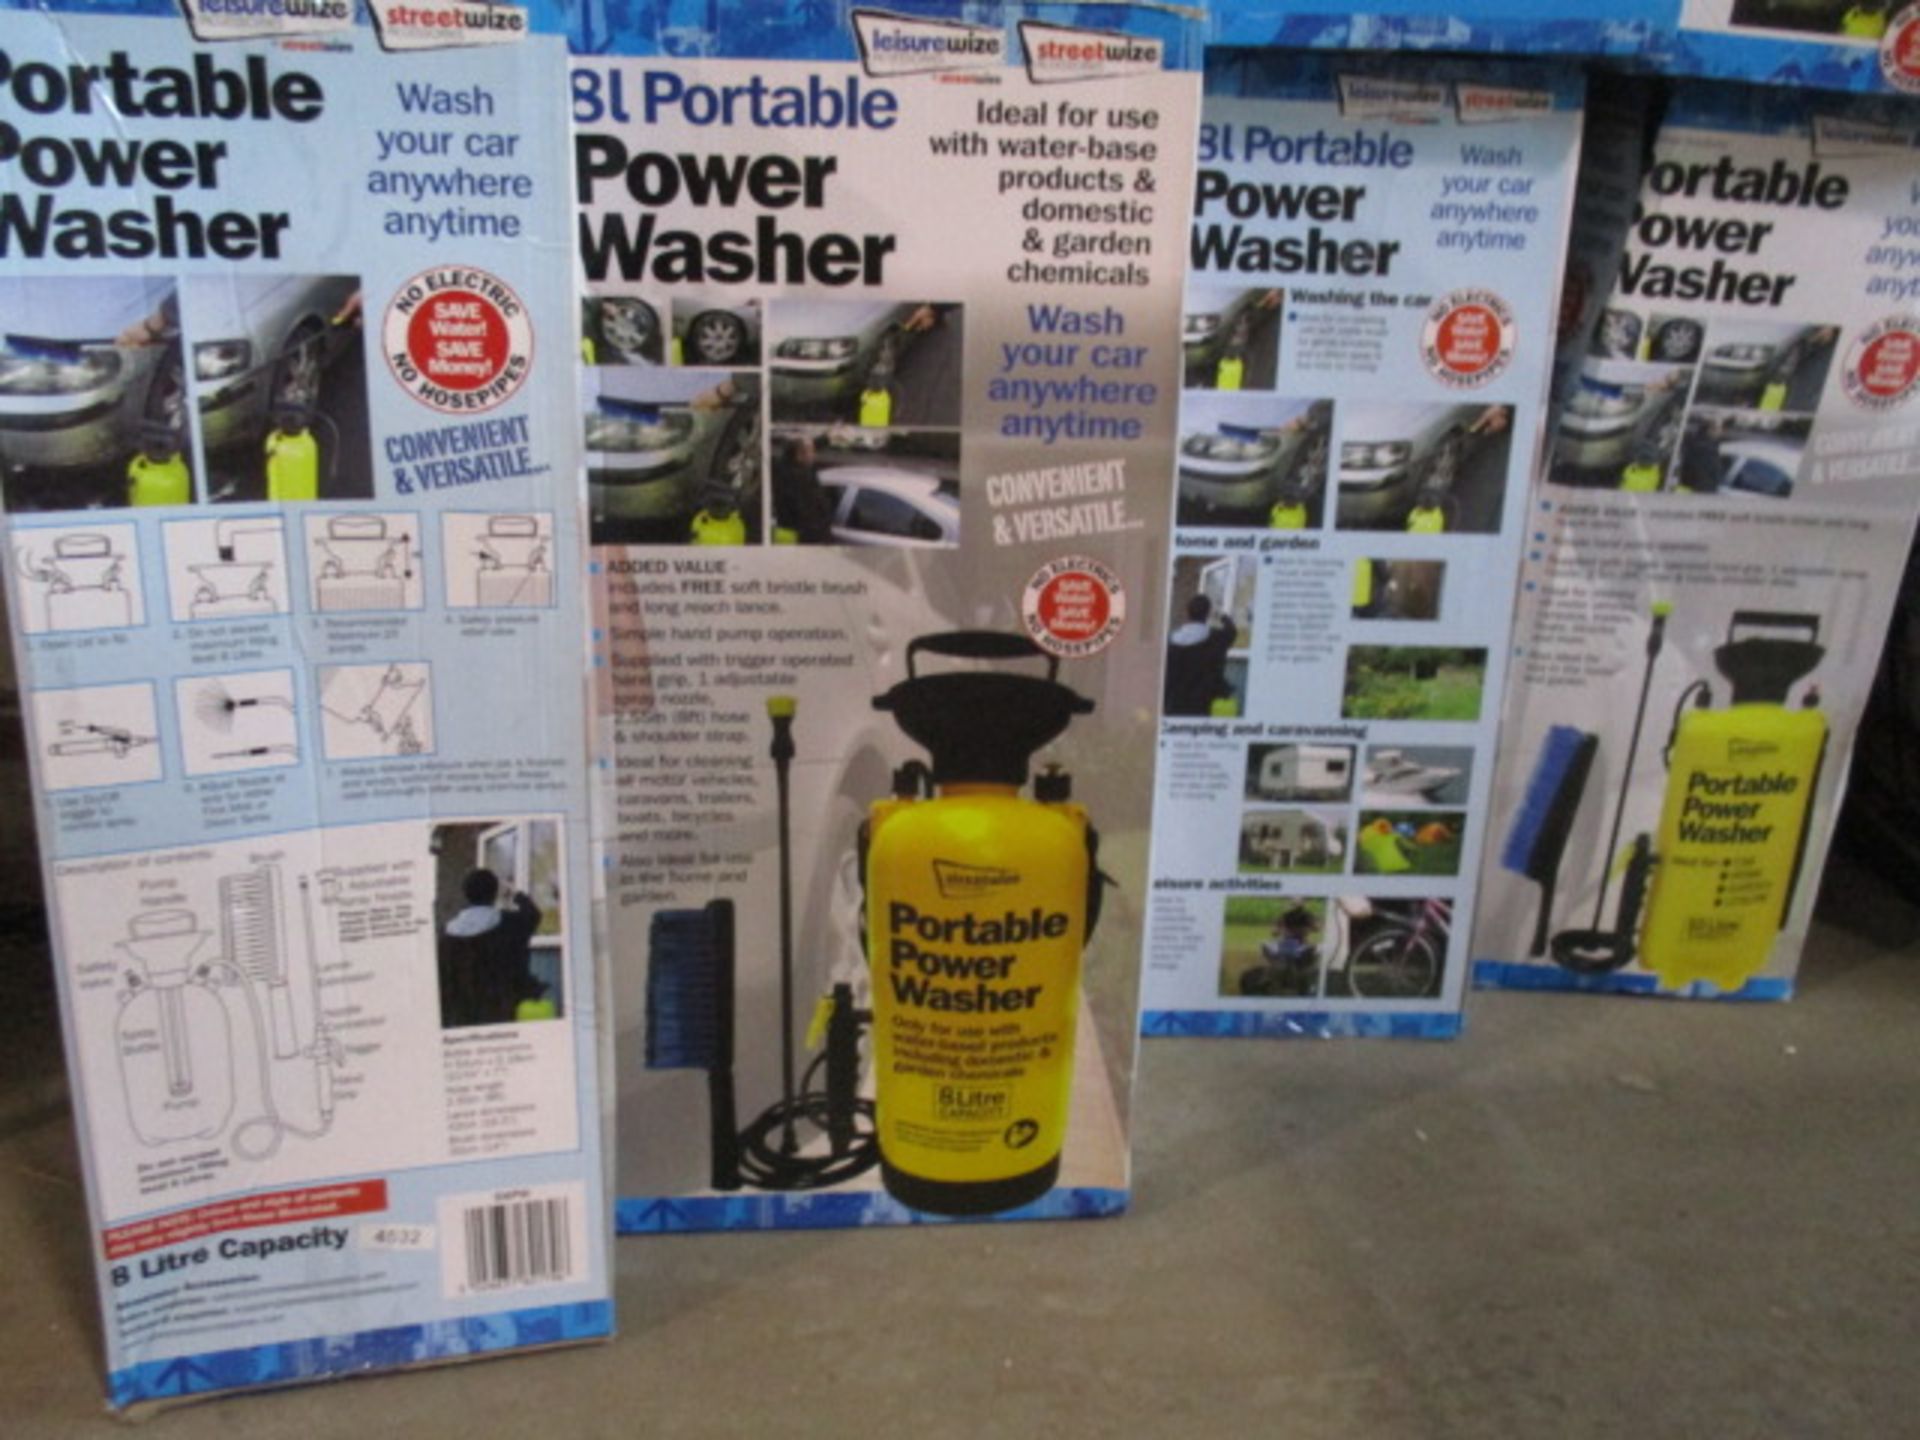 Portawash wash system boxed rrp £19.99 . Will be selected at random from stock 8l or 10l - Lot is